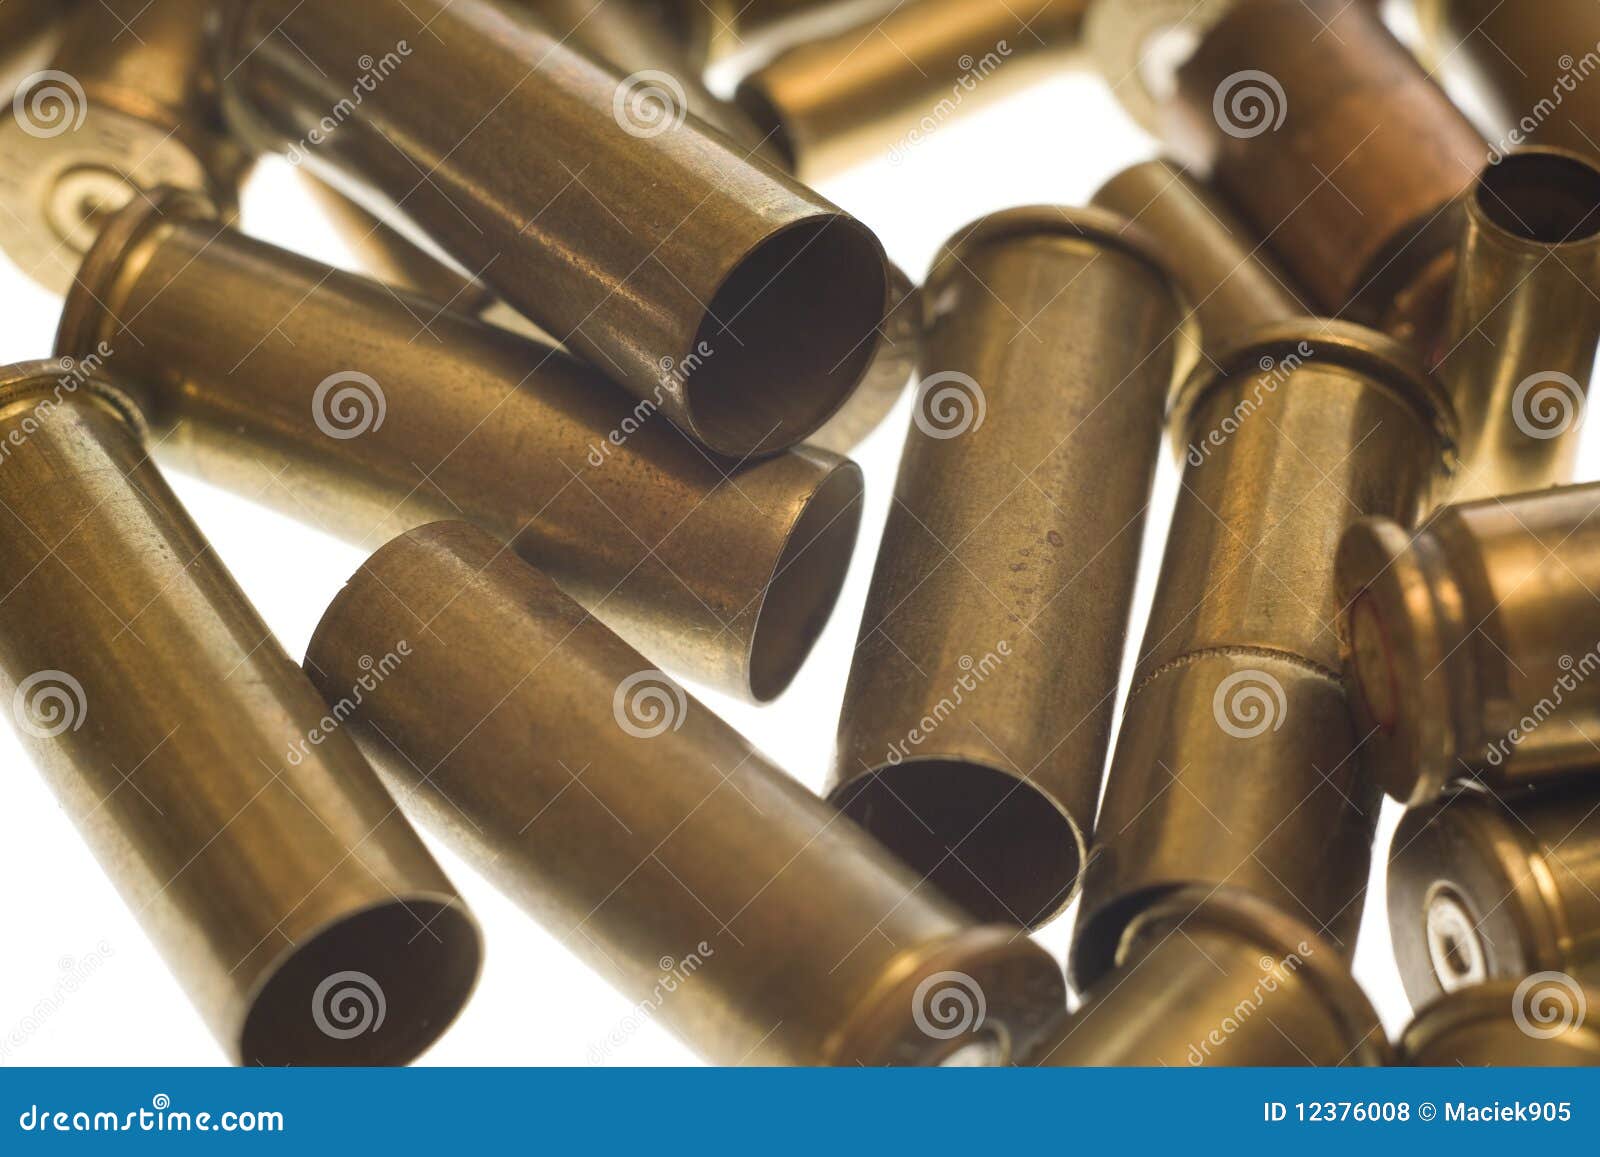 Empty spent ammunition casings in the box 31027566 Stock Photo at